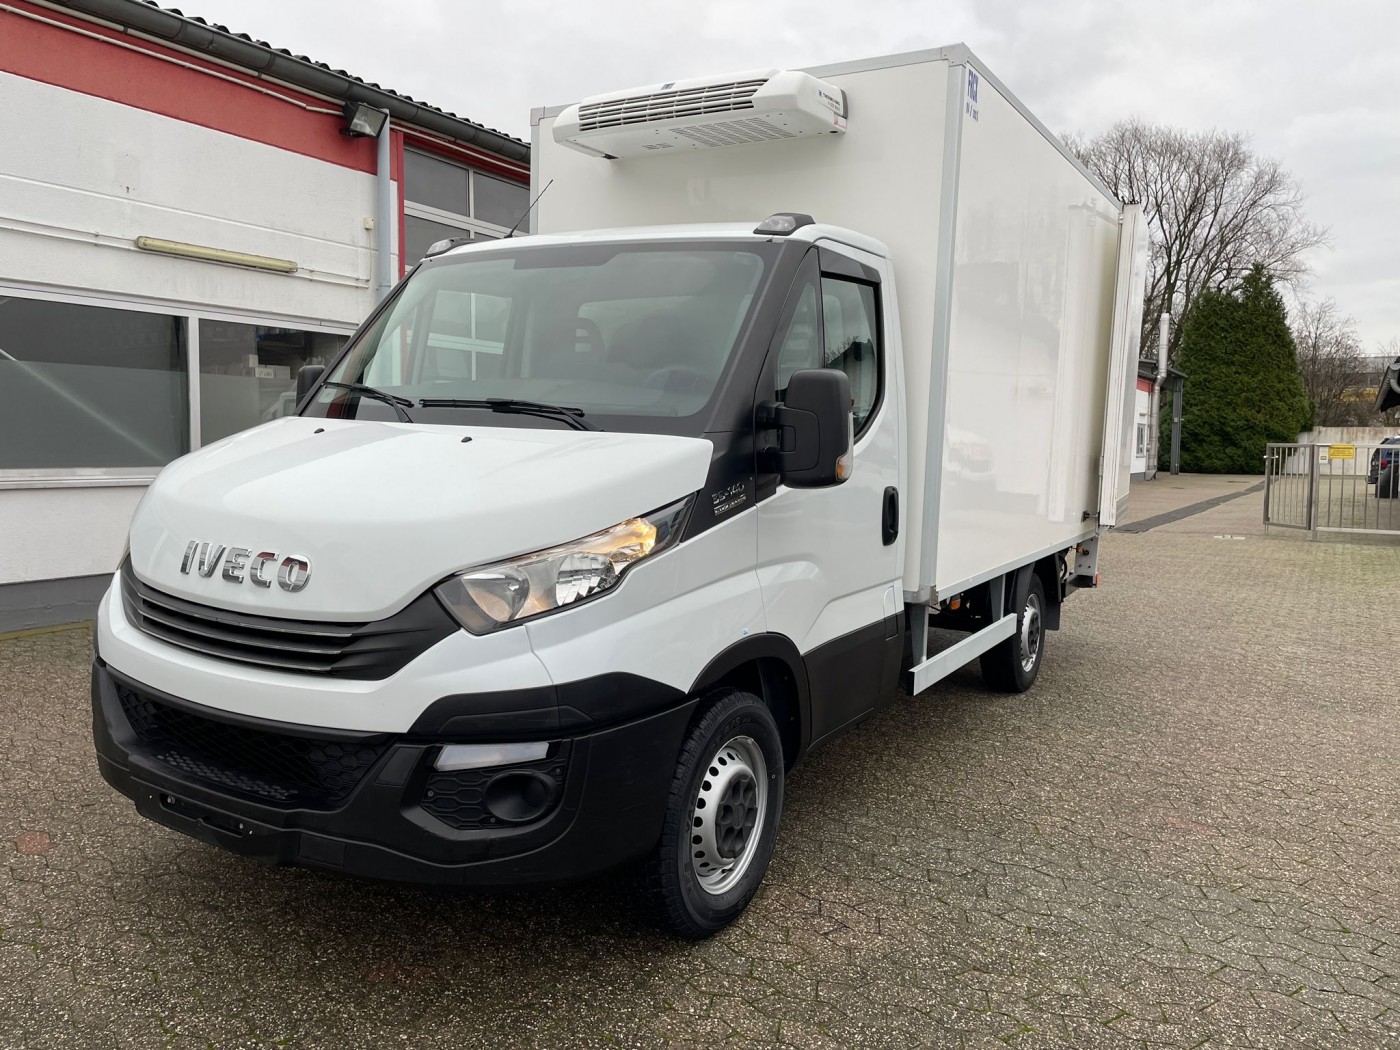 Iveco - IVECO Daily 35-140 Hi-Matic freezer case with Thermo King V300 MAX